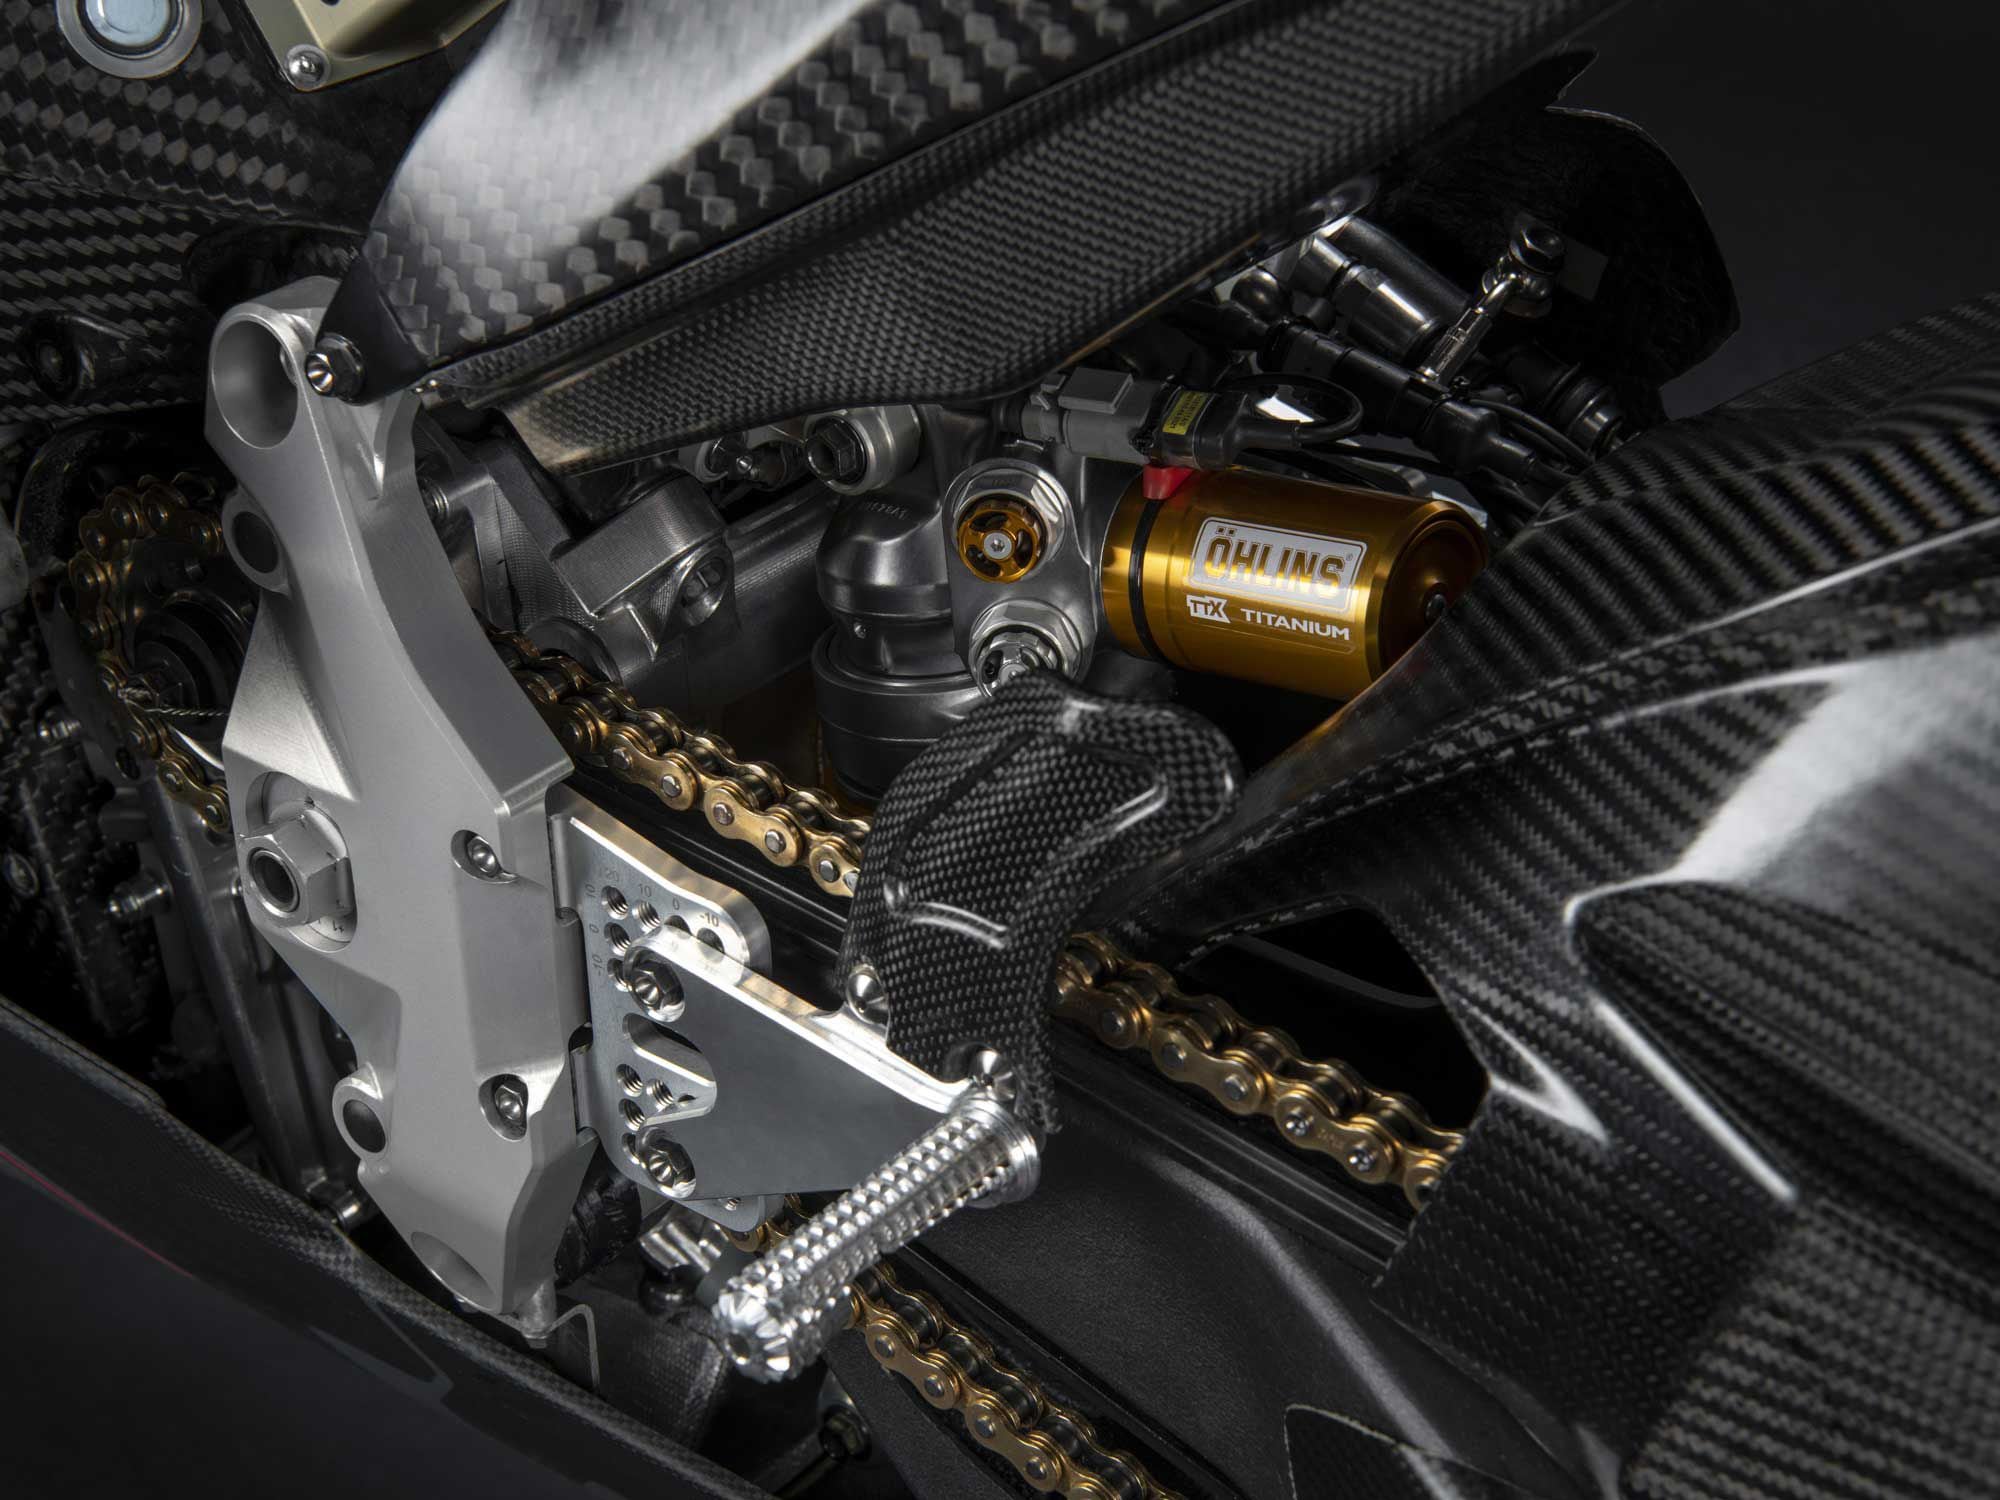 Öhlins suspension front and rear. Also note how aluminum chassis structures like the swingarm pivot (shown here) and the steering head join the carbon fiber battery-box monocoque.